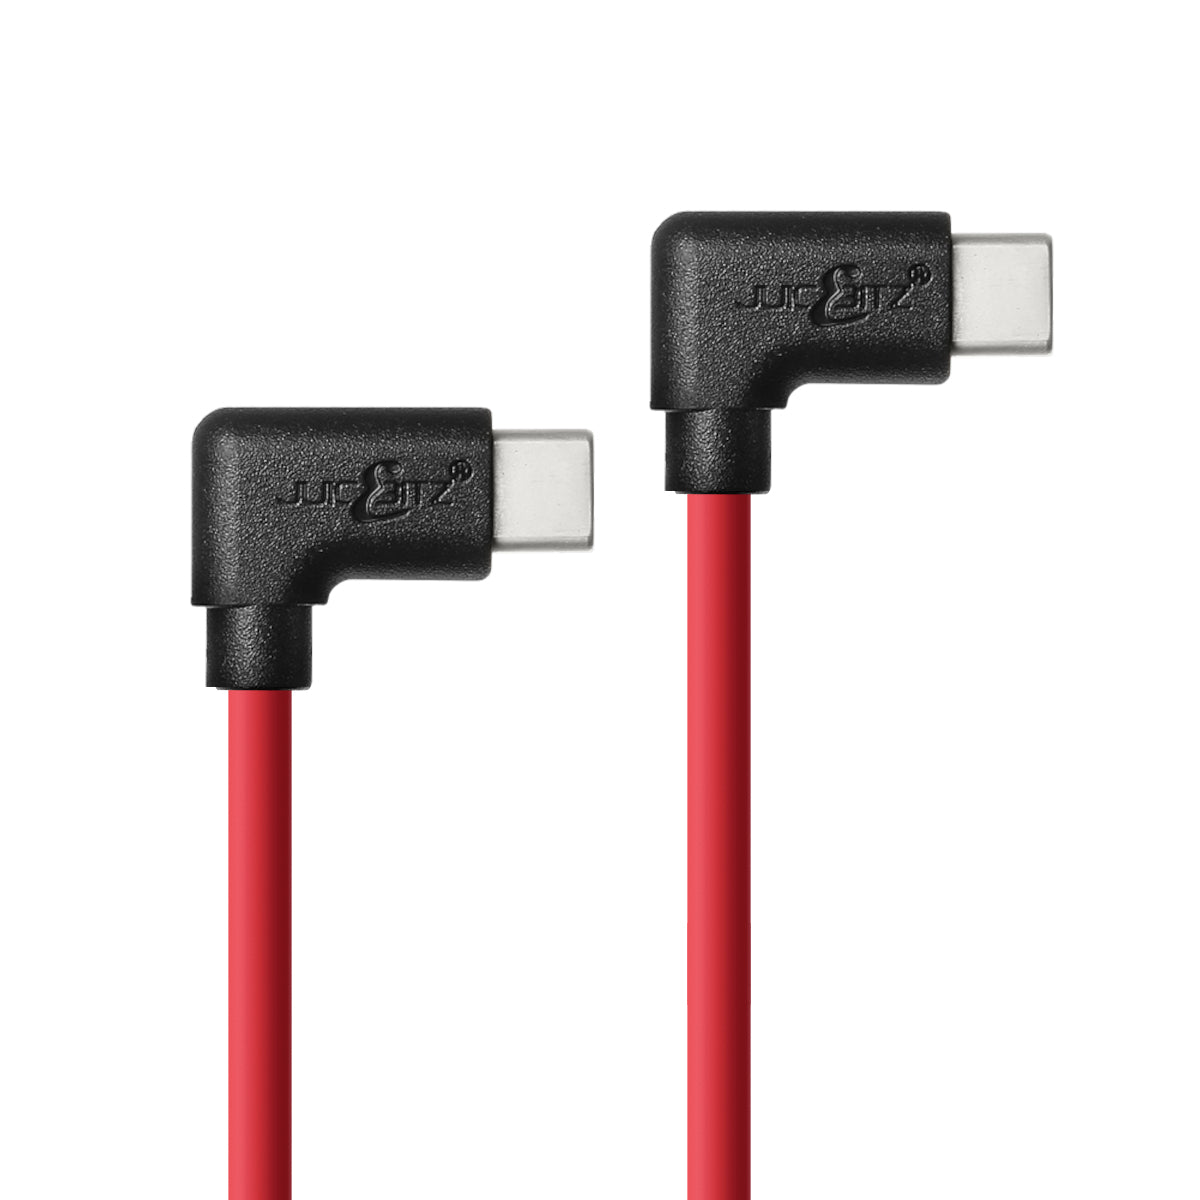 JuicEBitz - USB Charger Cables, Short or Extra Long For Samsung Mobile  Phones & Tablets